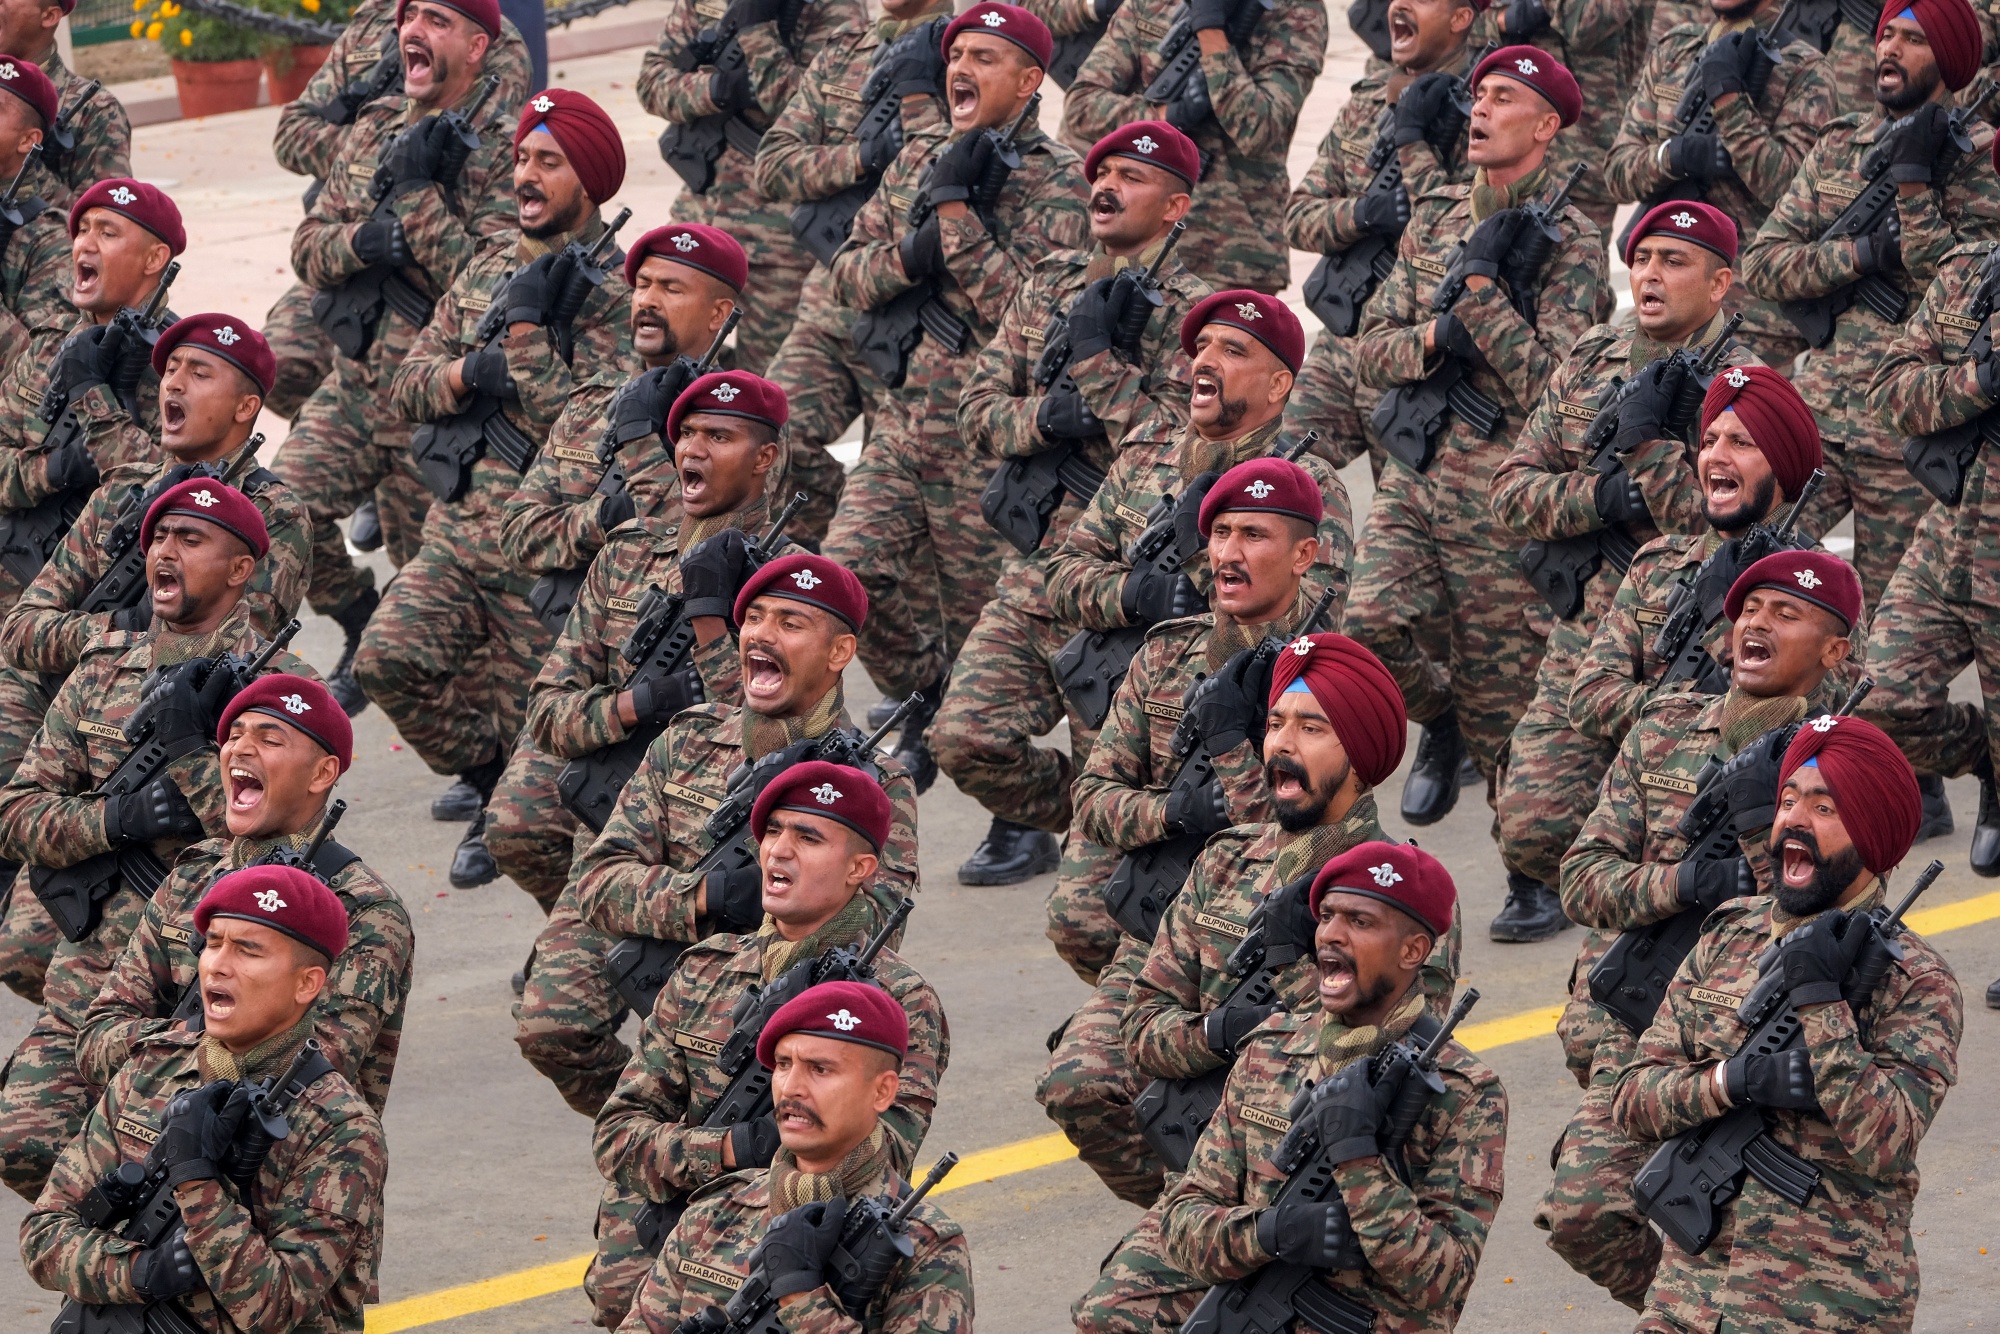 Indian Army: Indian Army plans certain changes in its uniforms